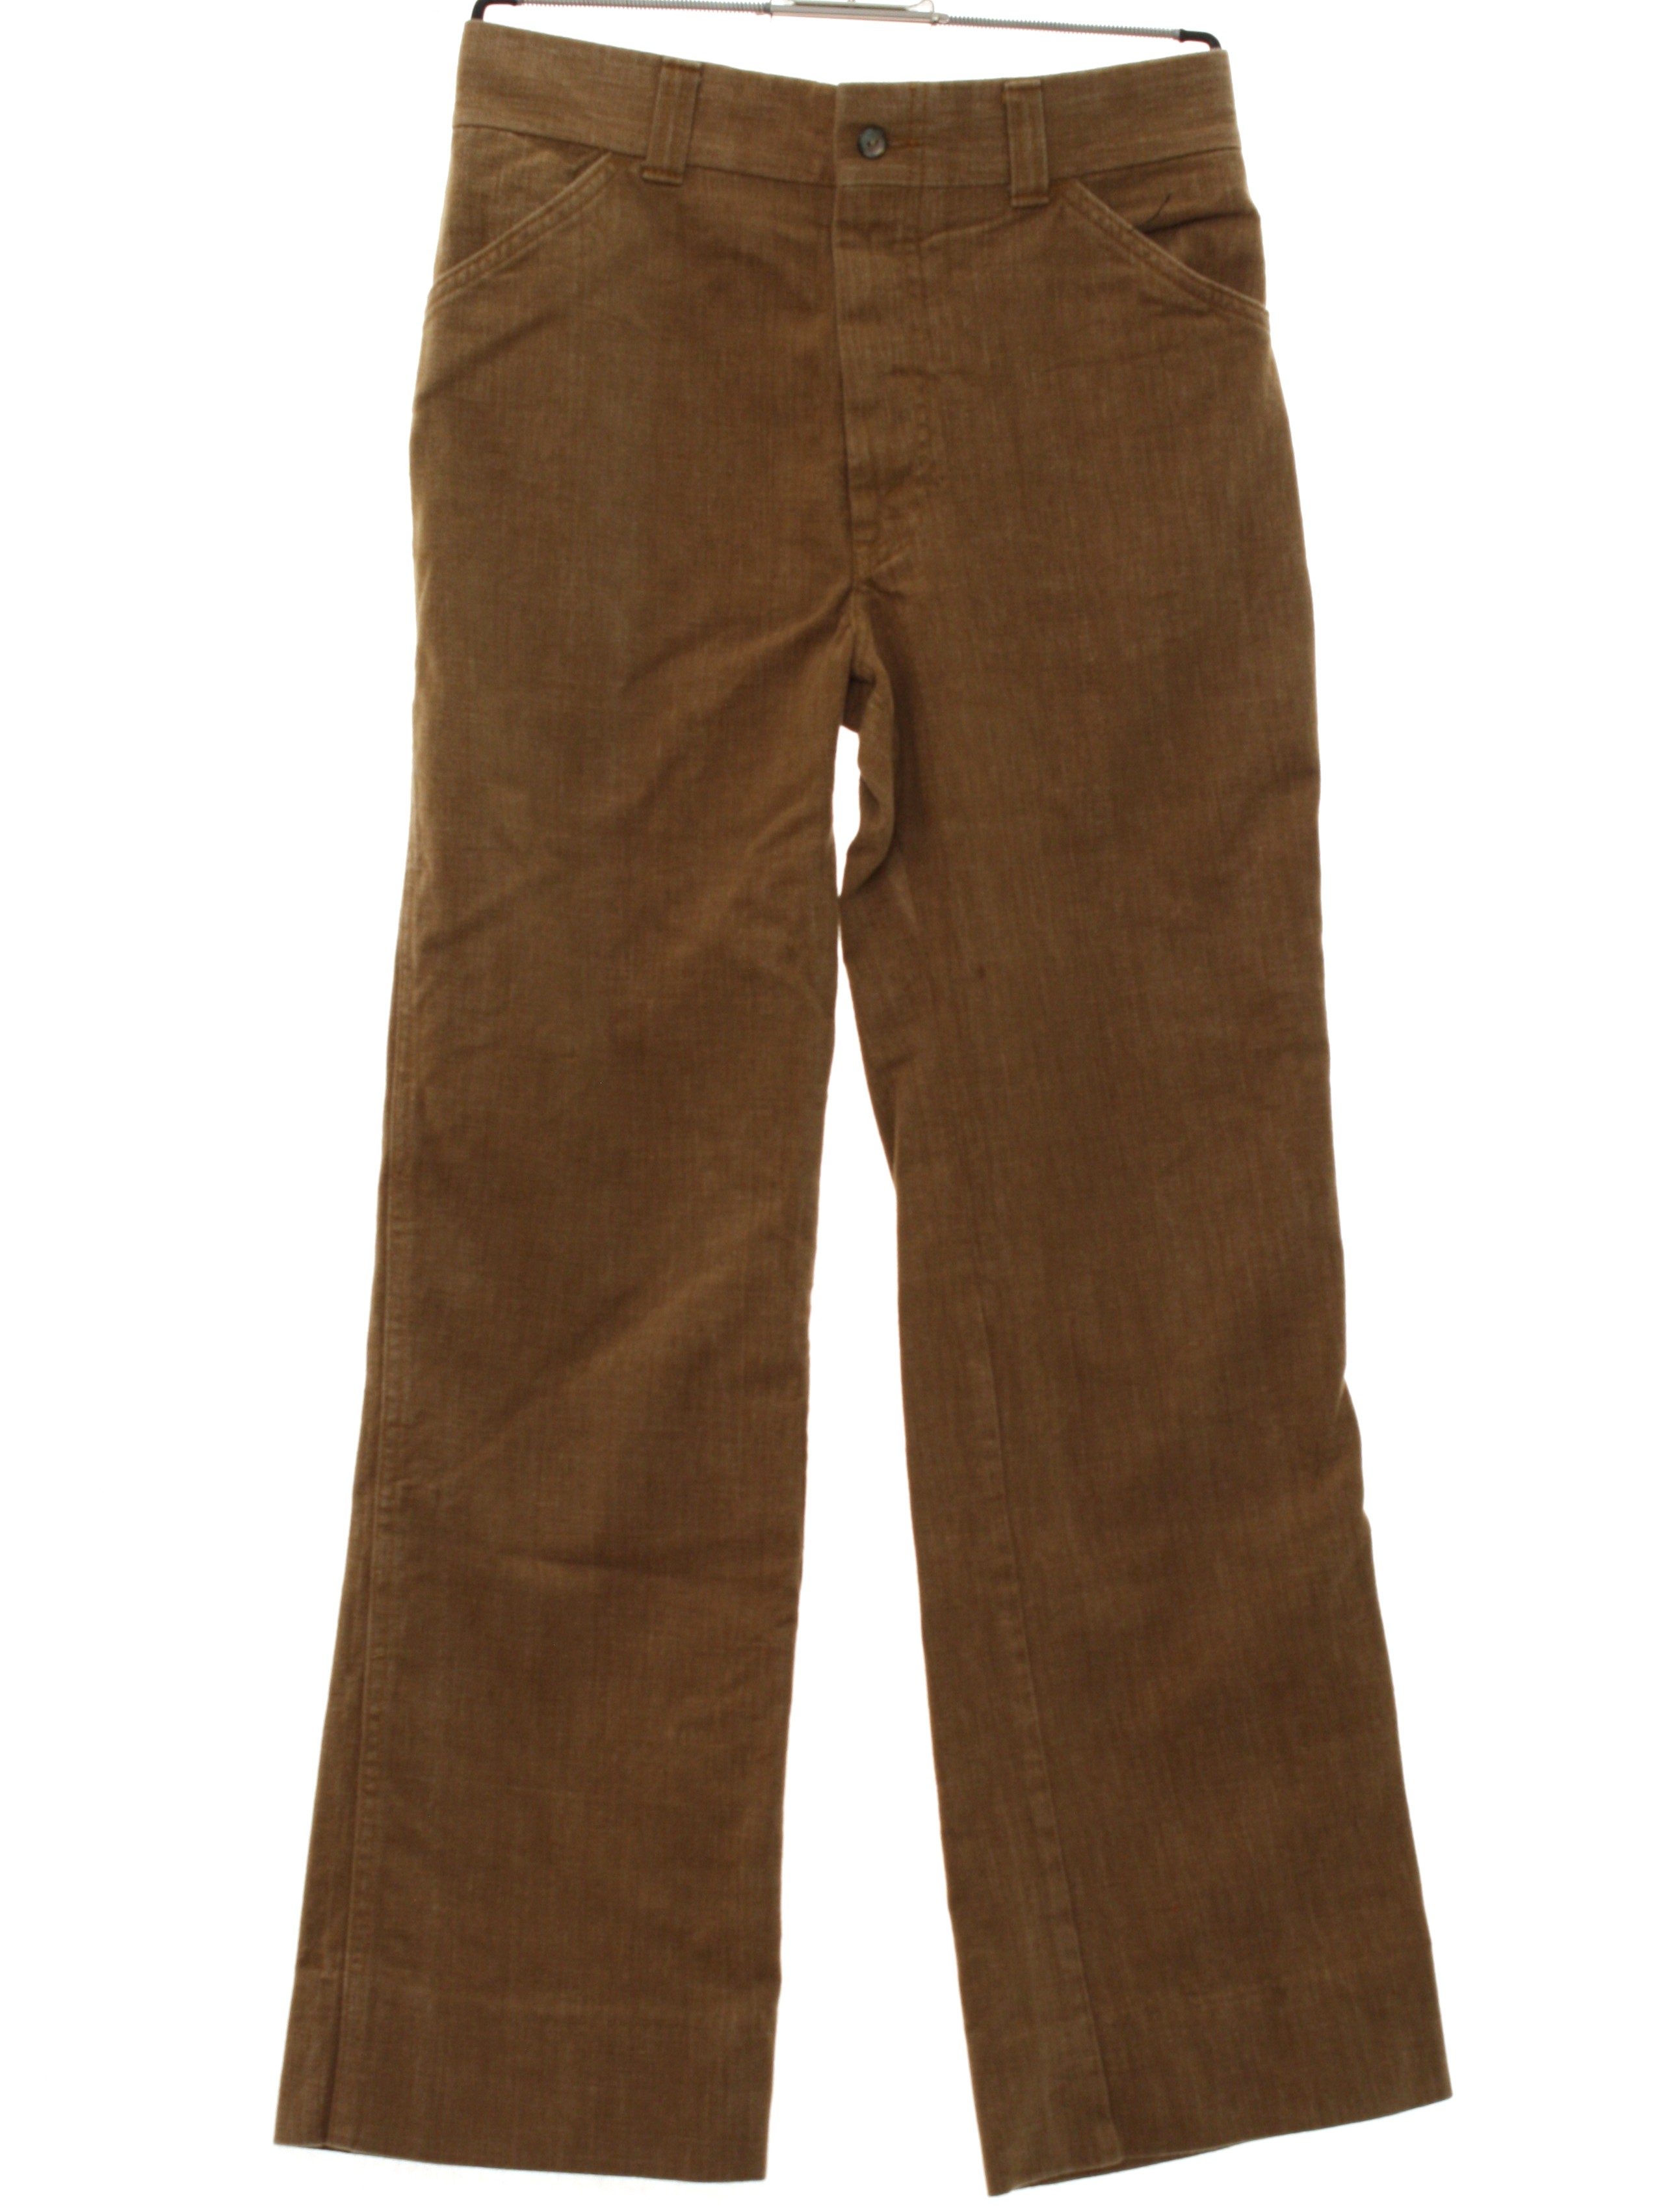 Retro 1970's Flared Pants / Flares (Missing Label) : 70s -Missing Label ...